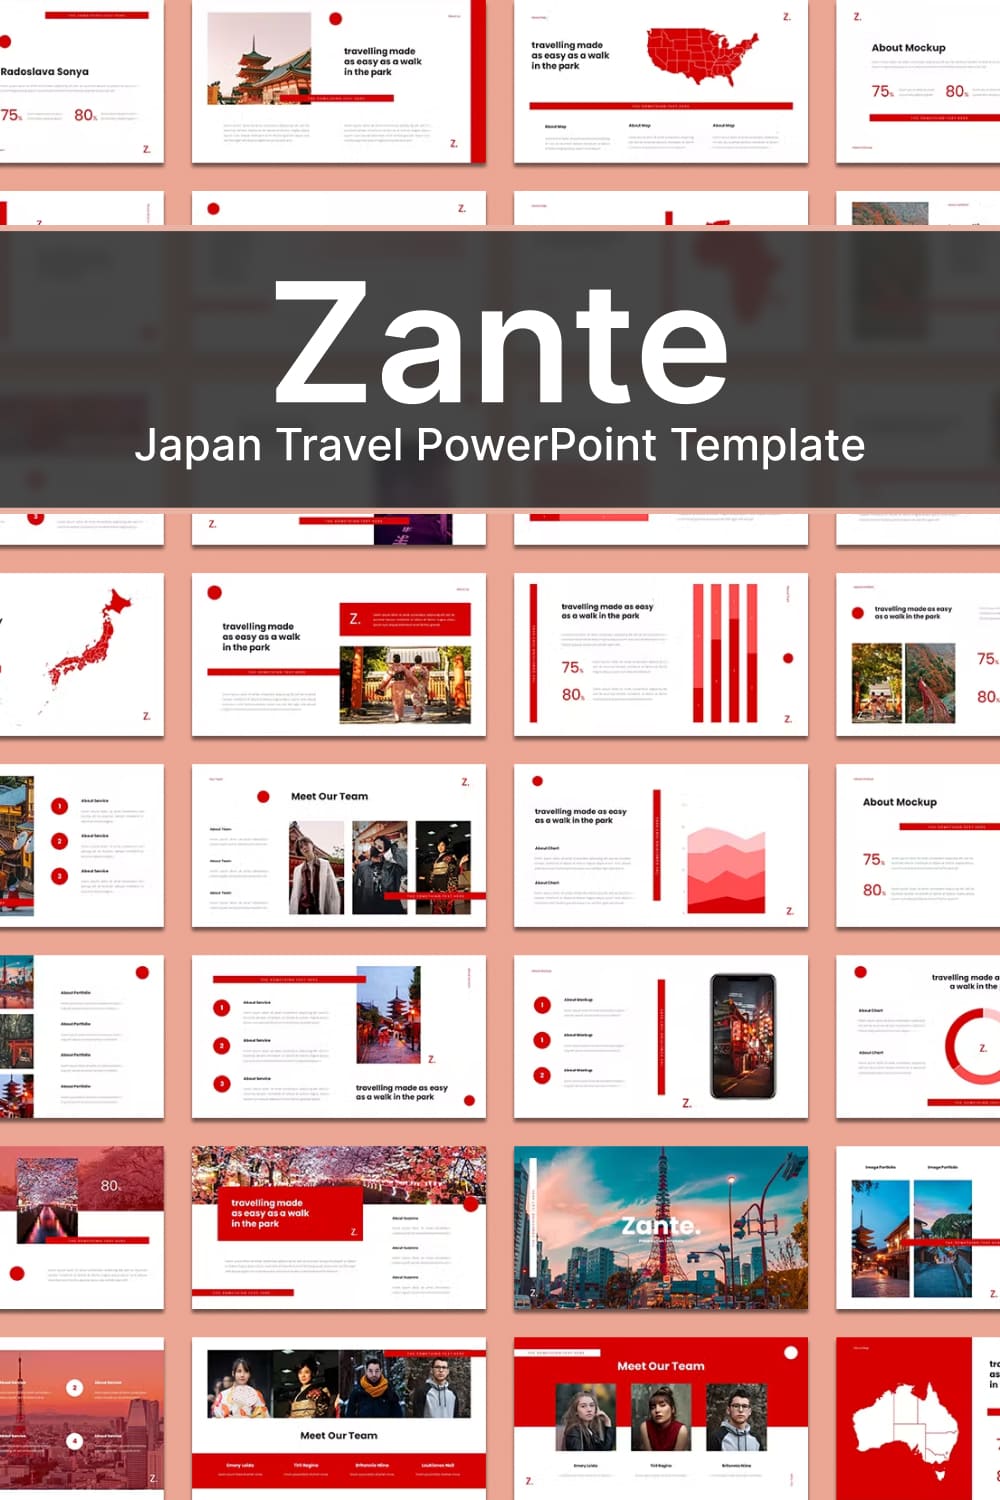 Zante japan travel powerpoint template - Pinterest image preview.